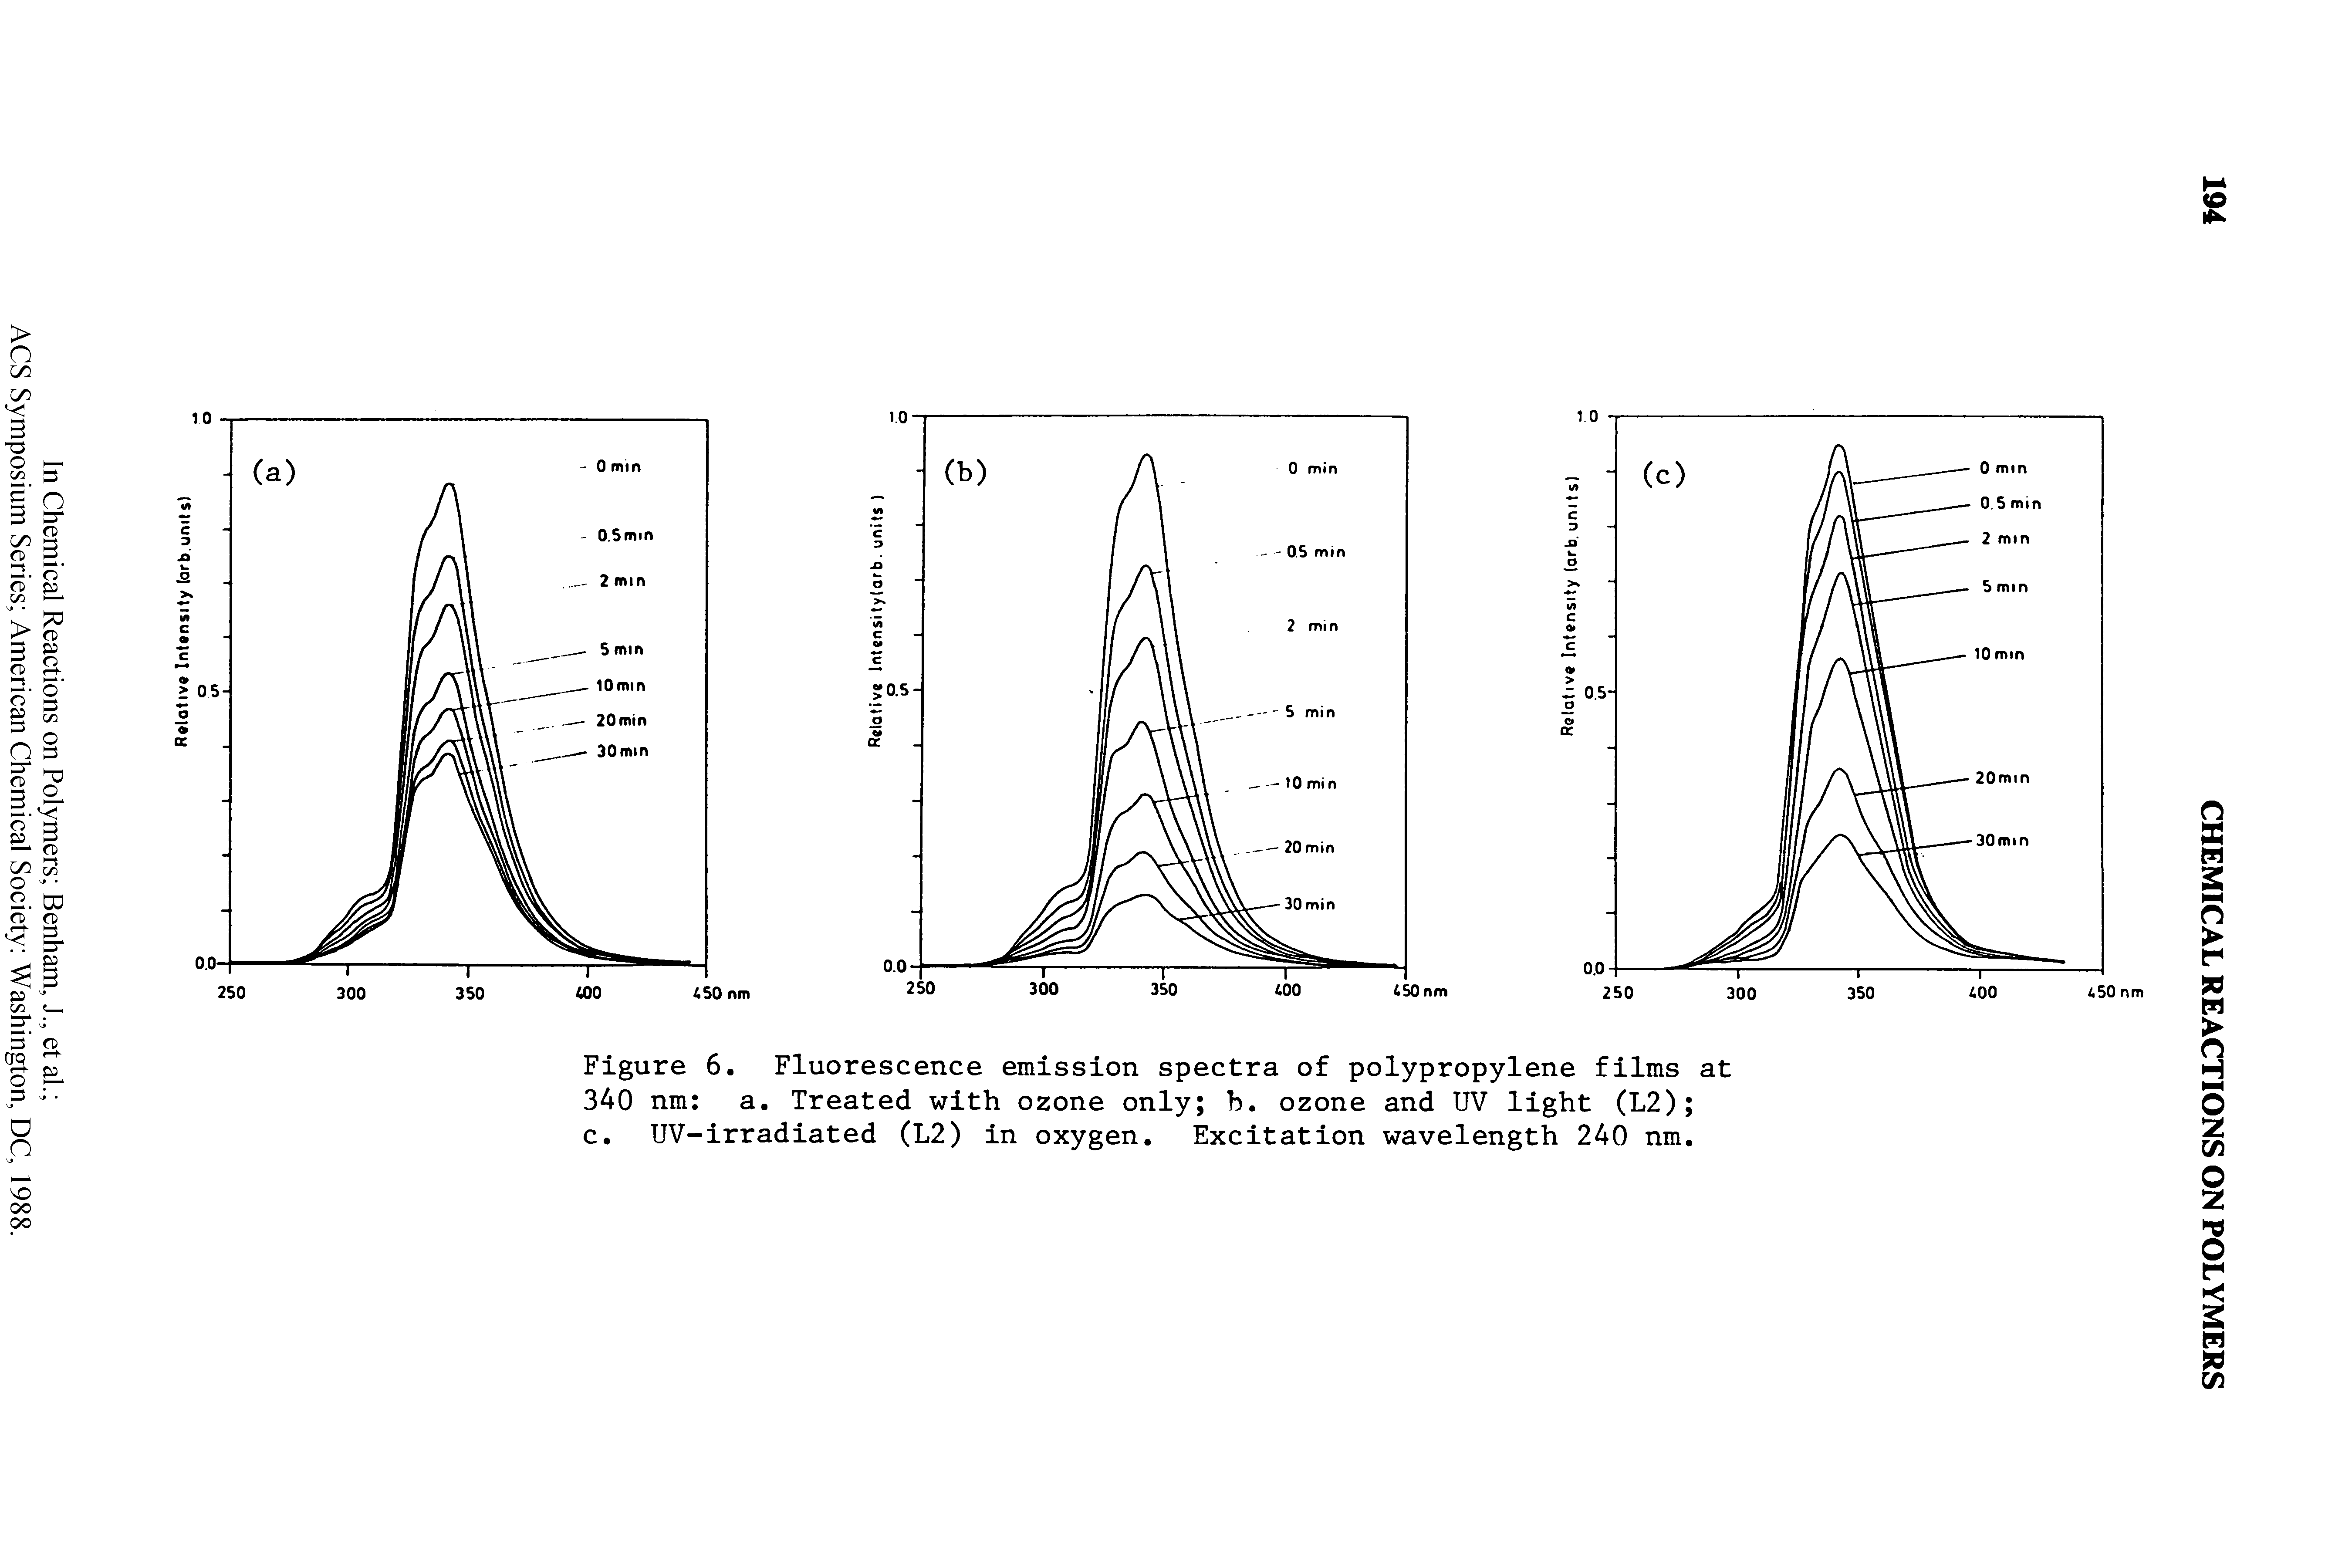 Figure 6. Fluorescence emission spectra of polypropylene films at 340 nm a. Treated with ozone only b. ozone and UV light (L2) c. UV-irradiated (L2) in oxygen. Excitation wavelength 240 nm.